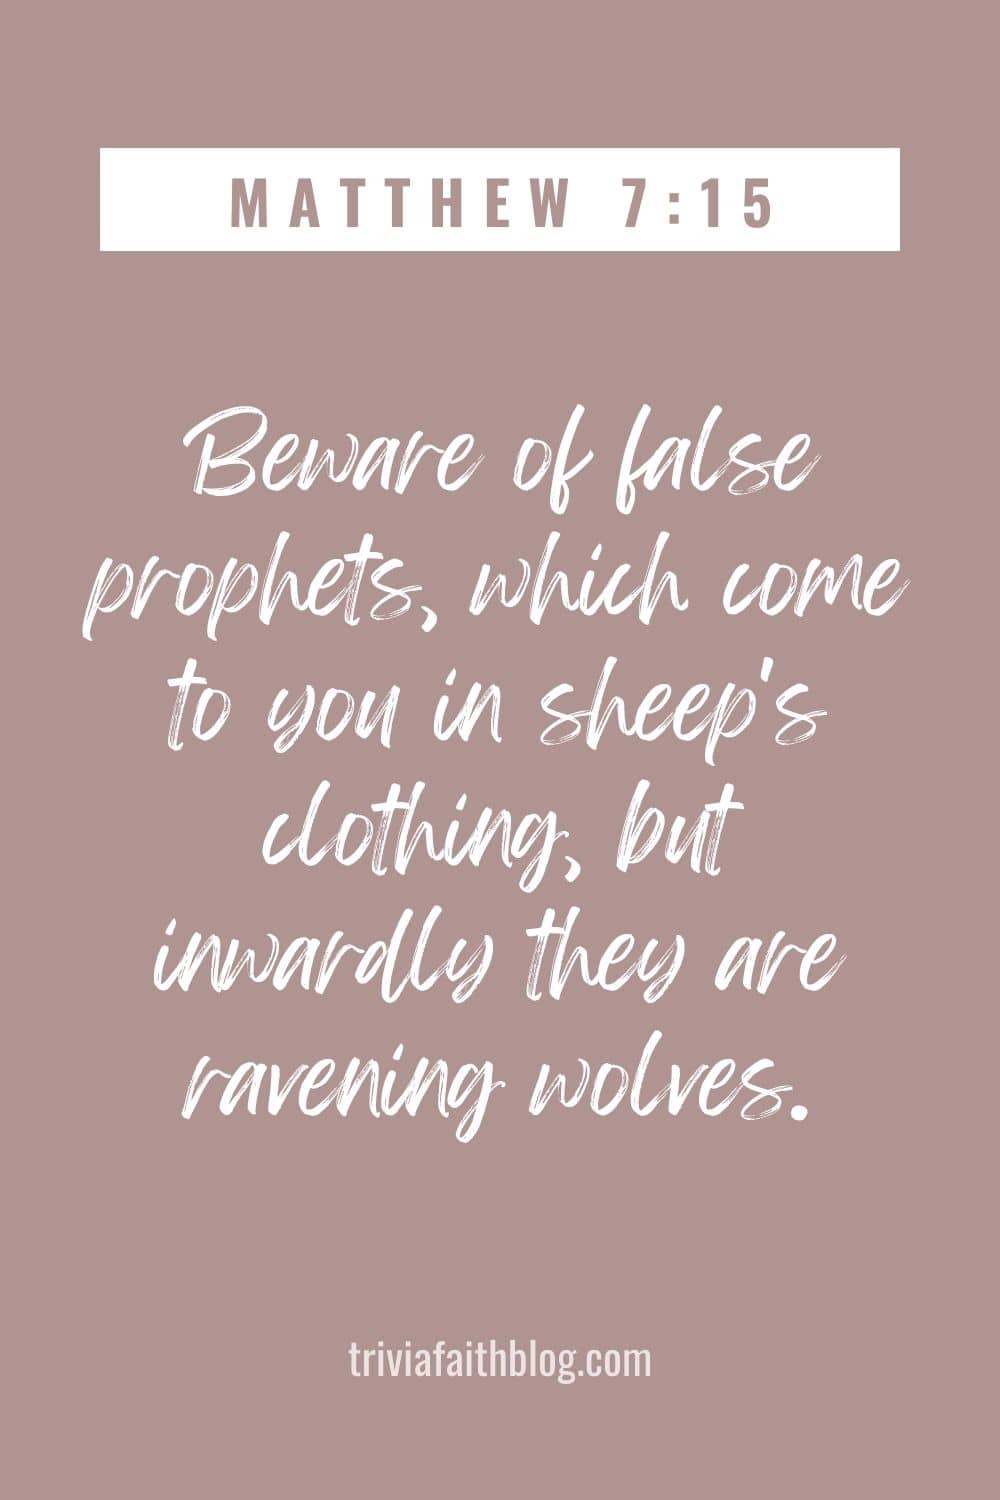 Beware of false prophets, which come to you in sheep's clothing, but inwardly they are ravening wolves